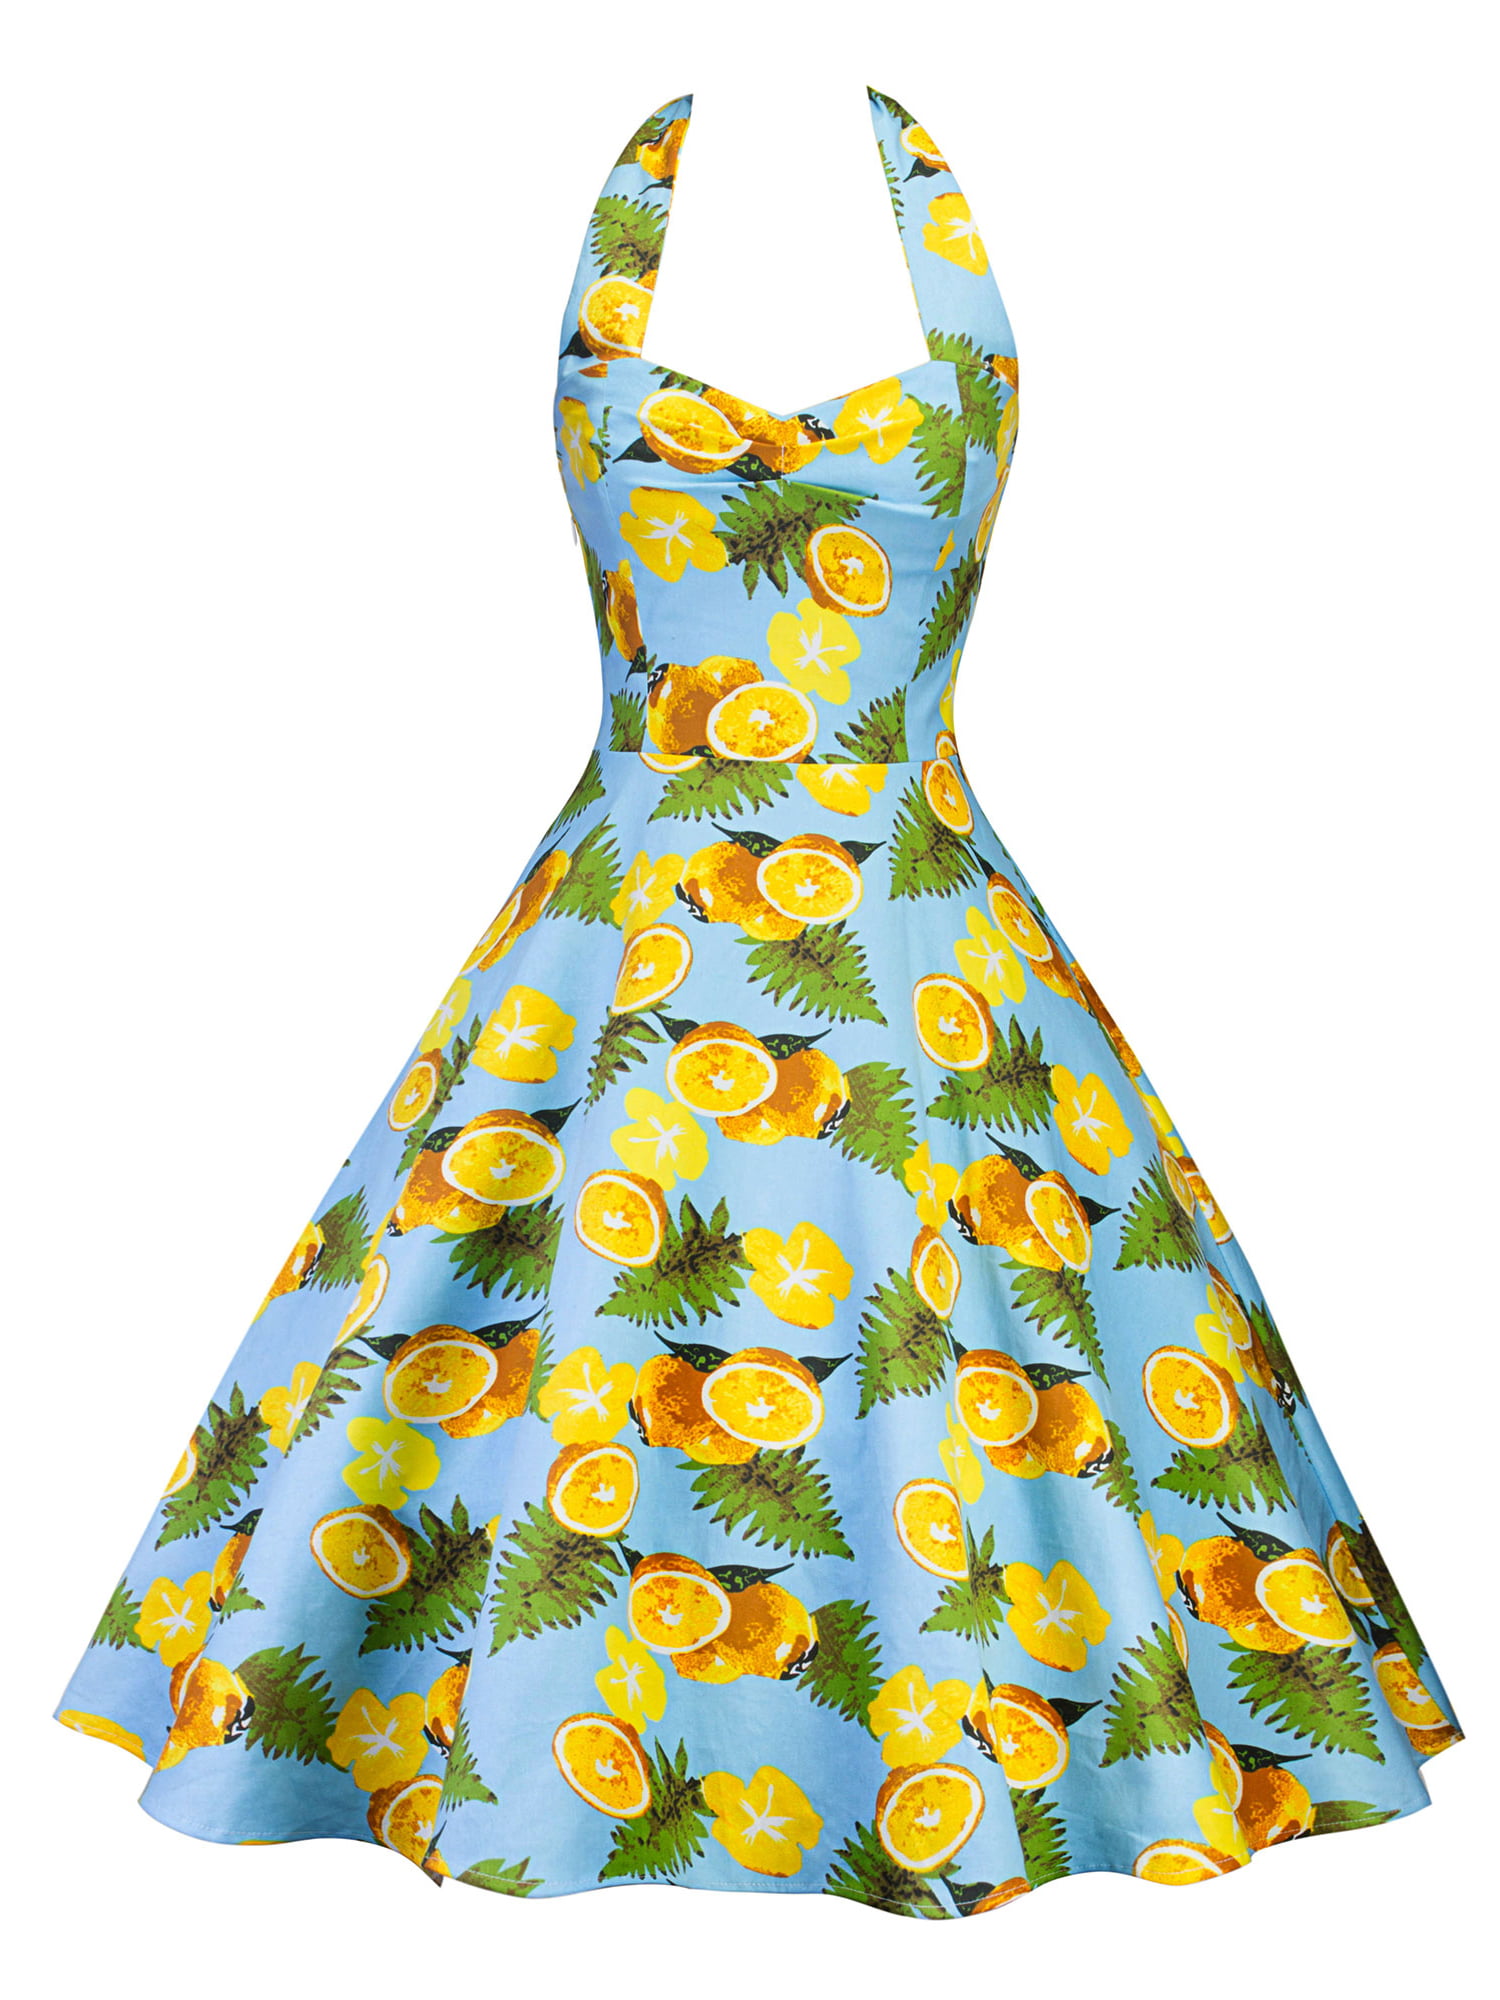 Black floral and yellow 1960s vintage dress apron